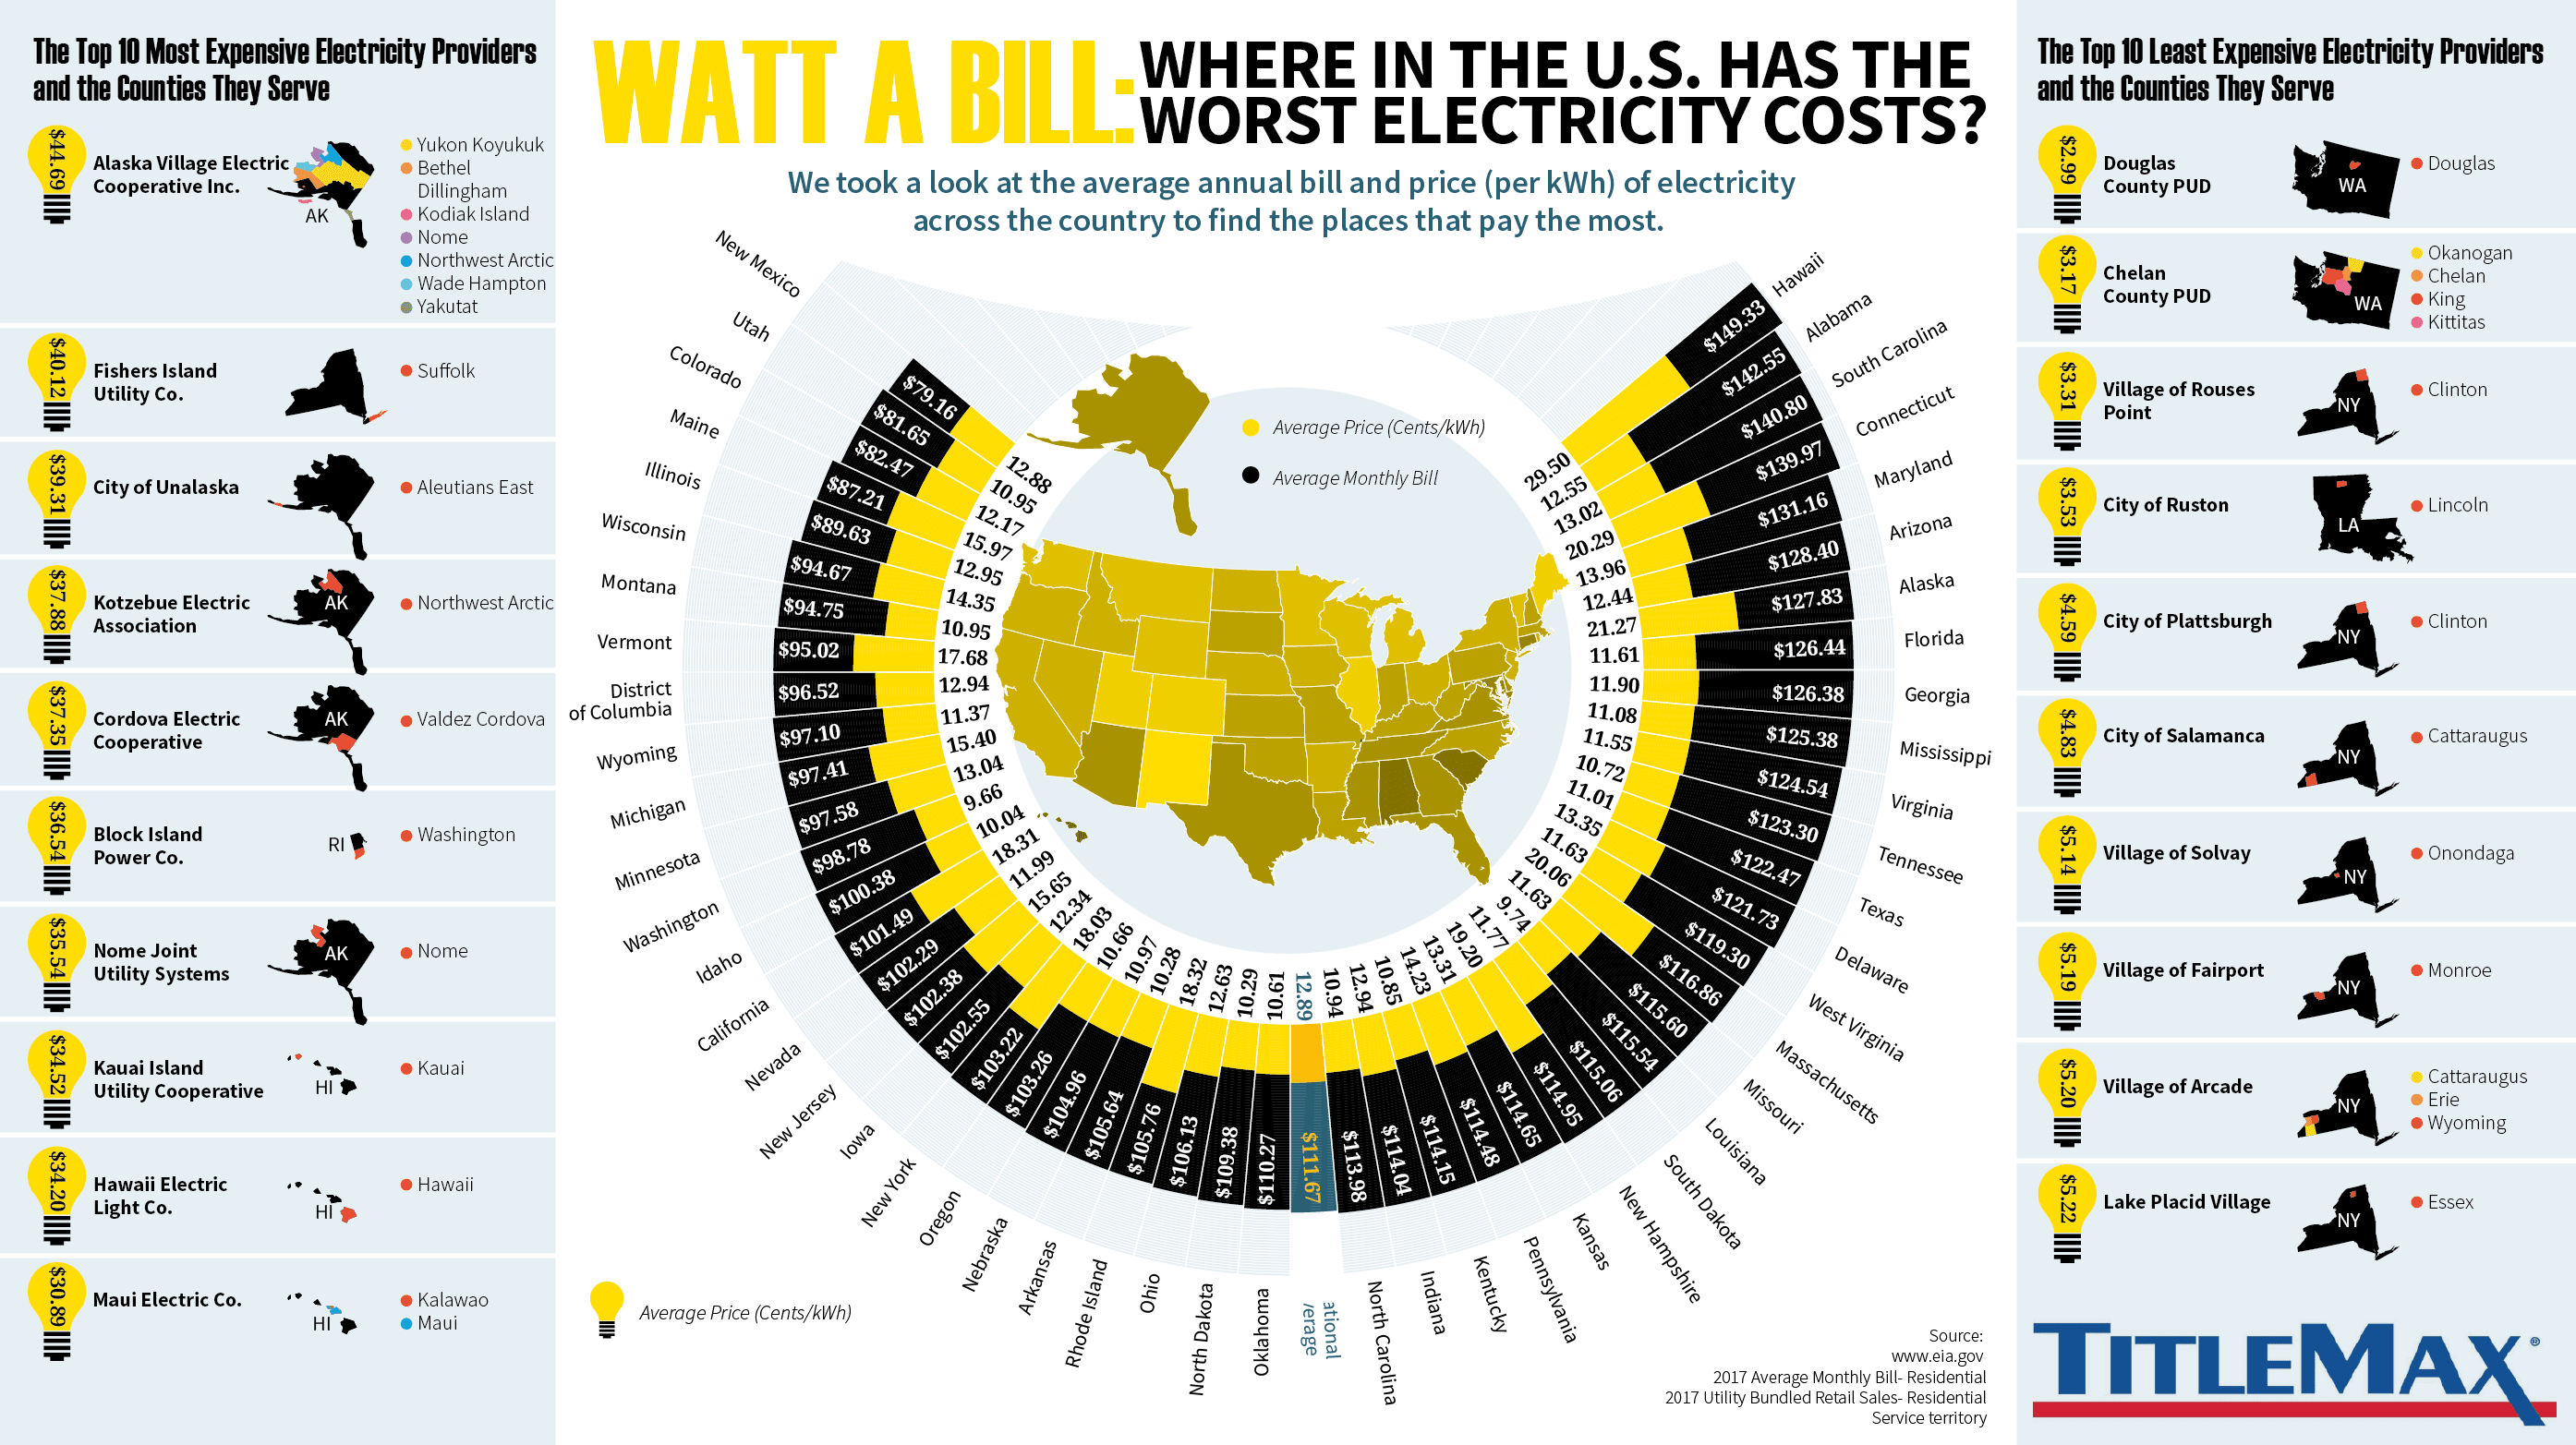 Where in the US Has the Worst Electricity Bills?